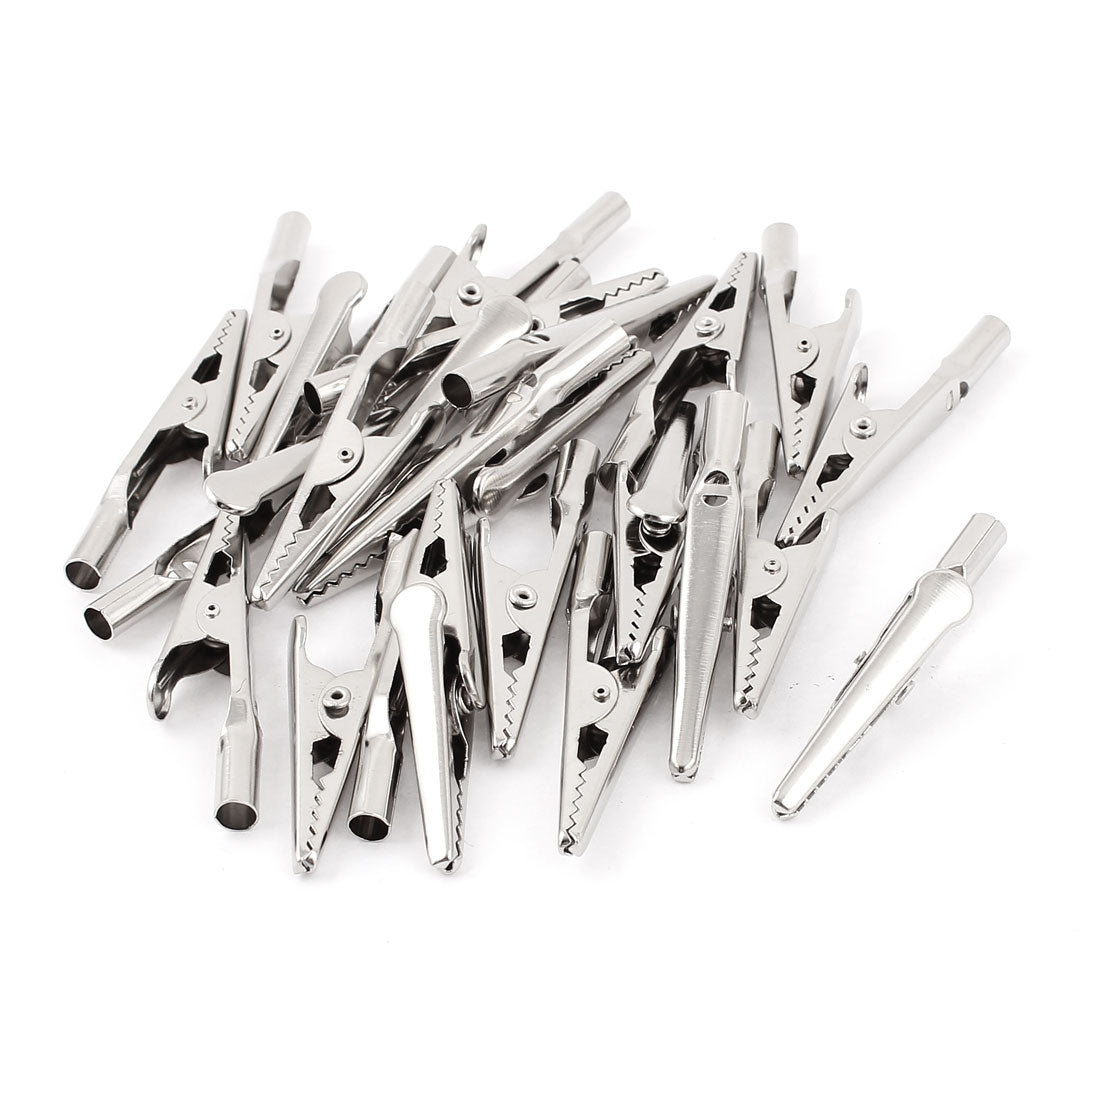 uxcell Uxcell 25 Pcs Silver Tone Metal Alligator Clip Crocodile Clamps